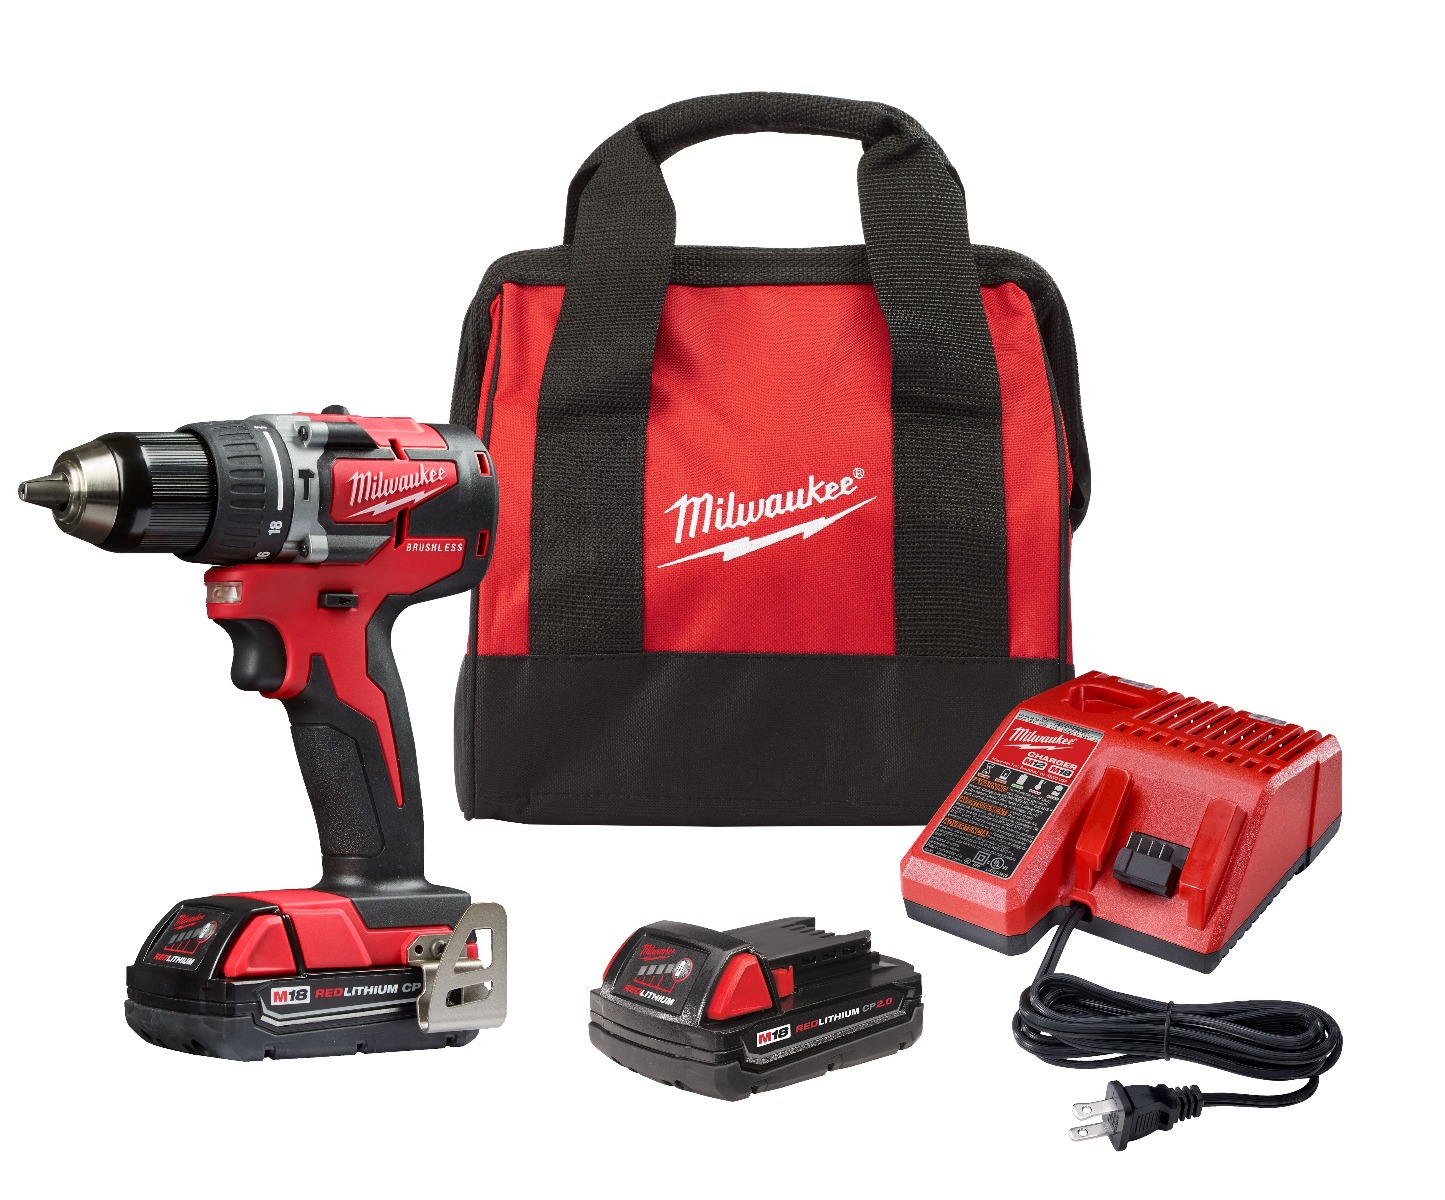 M18 18V Lithium-Ion Brushless Cordless 1/2-Inch Compact Hammer Drill/Driver Kit W/ (2) Batteries